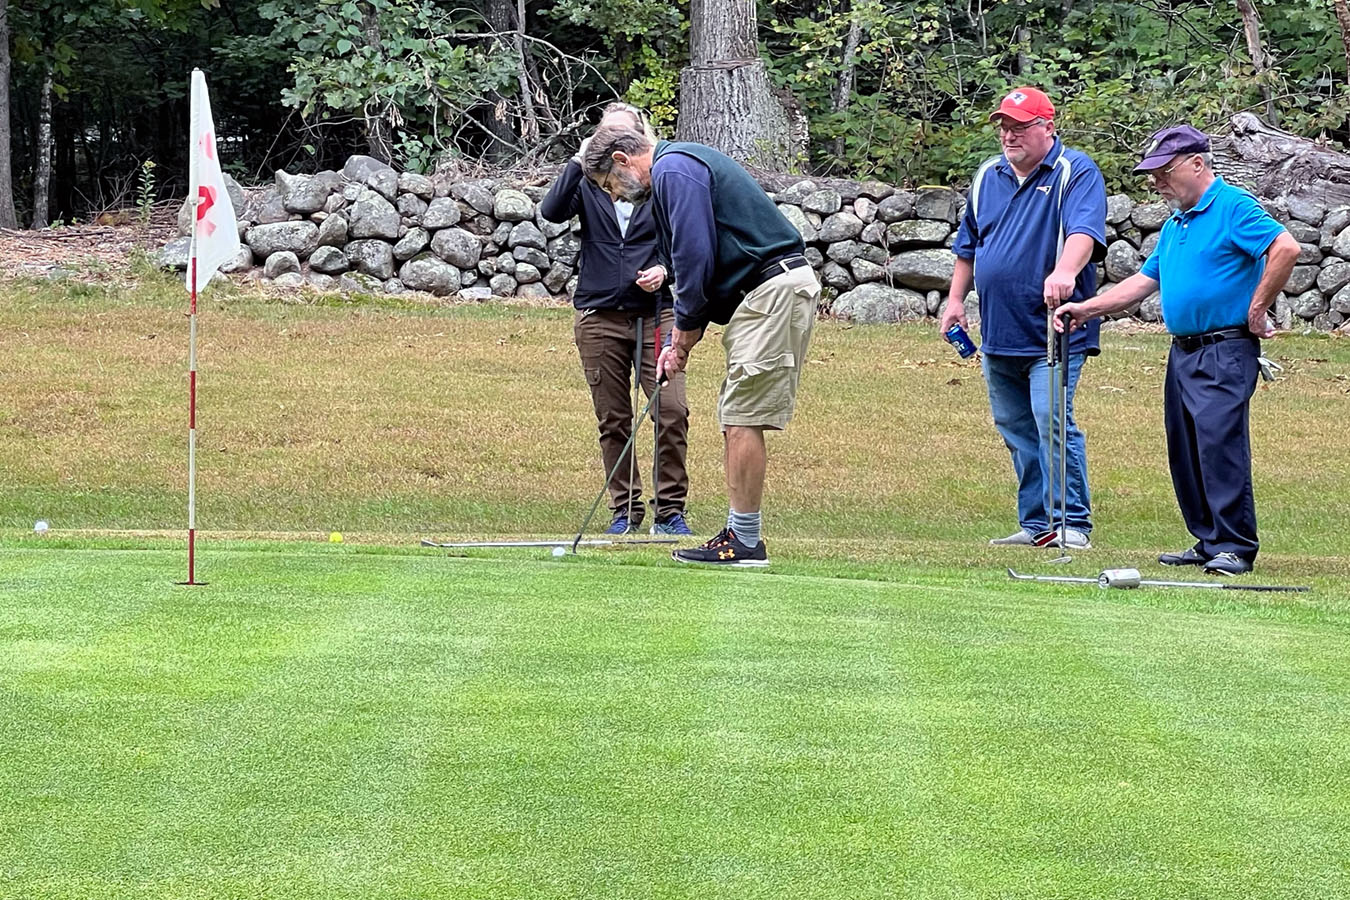 Chamber of Commerce Team chipping onto green